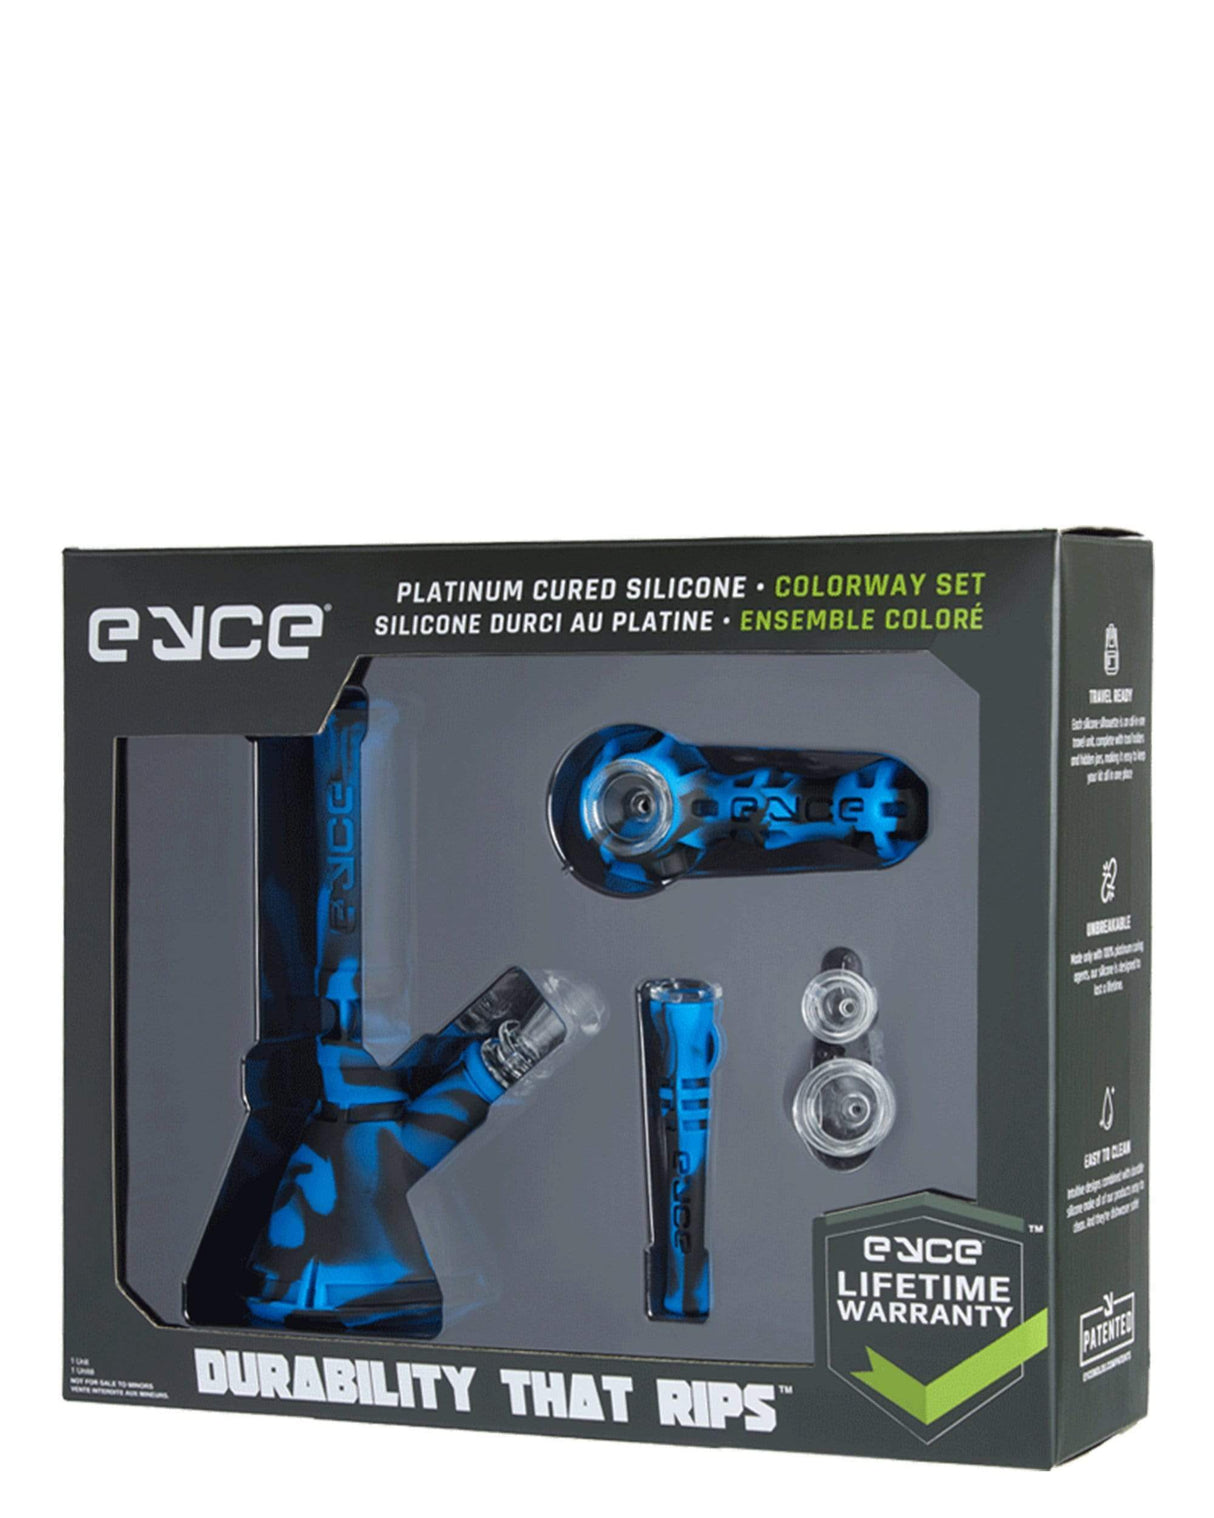 Eyce Colorway Boxed Set featuring silicone bong and accessories in blue, front view on black background